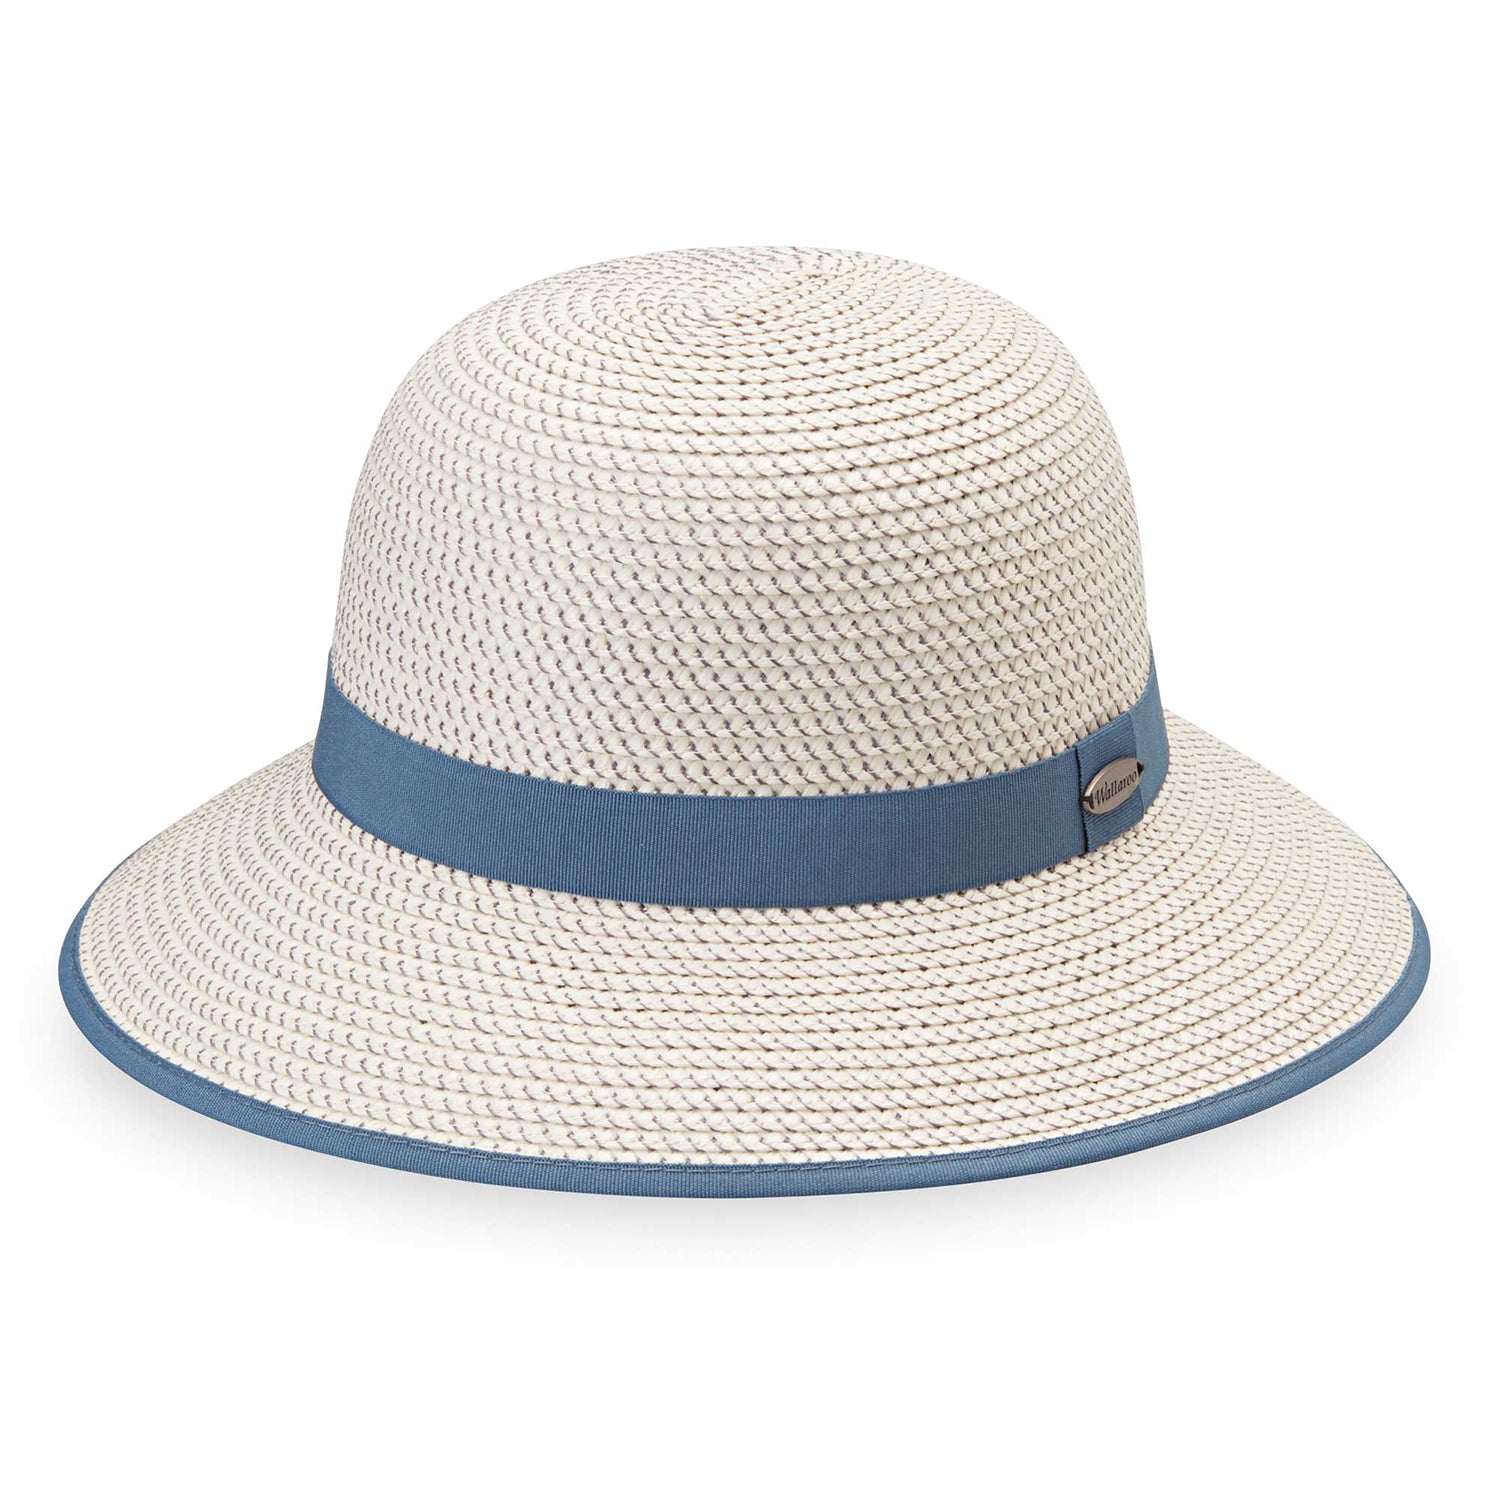 Featuring Wallaroo Bucket style cap for women made with packable, UPF 50 material